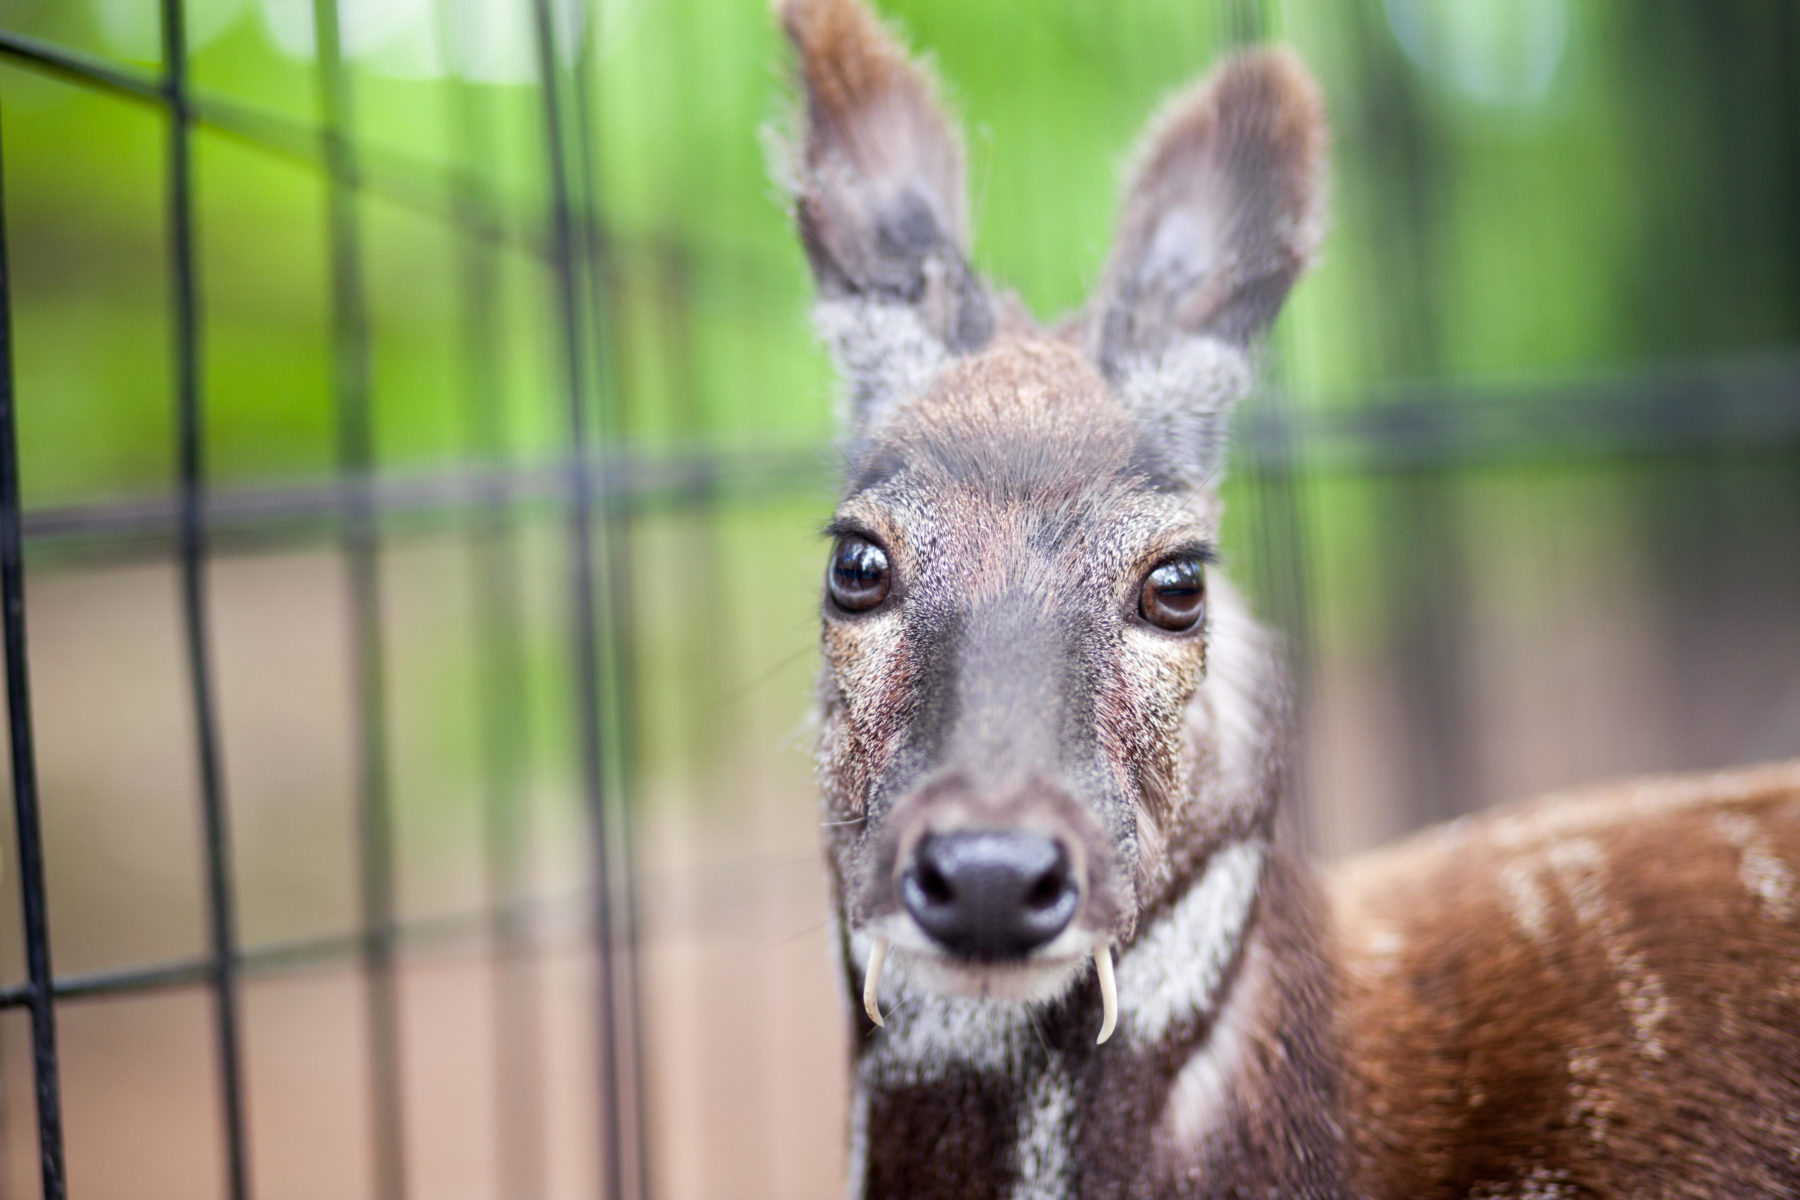 A Siberian musk deer in captivity. The Himalayan musk deer is one of the species which could be farmed for commercial purposes under new legislation in Nepal (Image: Yury Stroykin / Alamy)